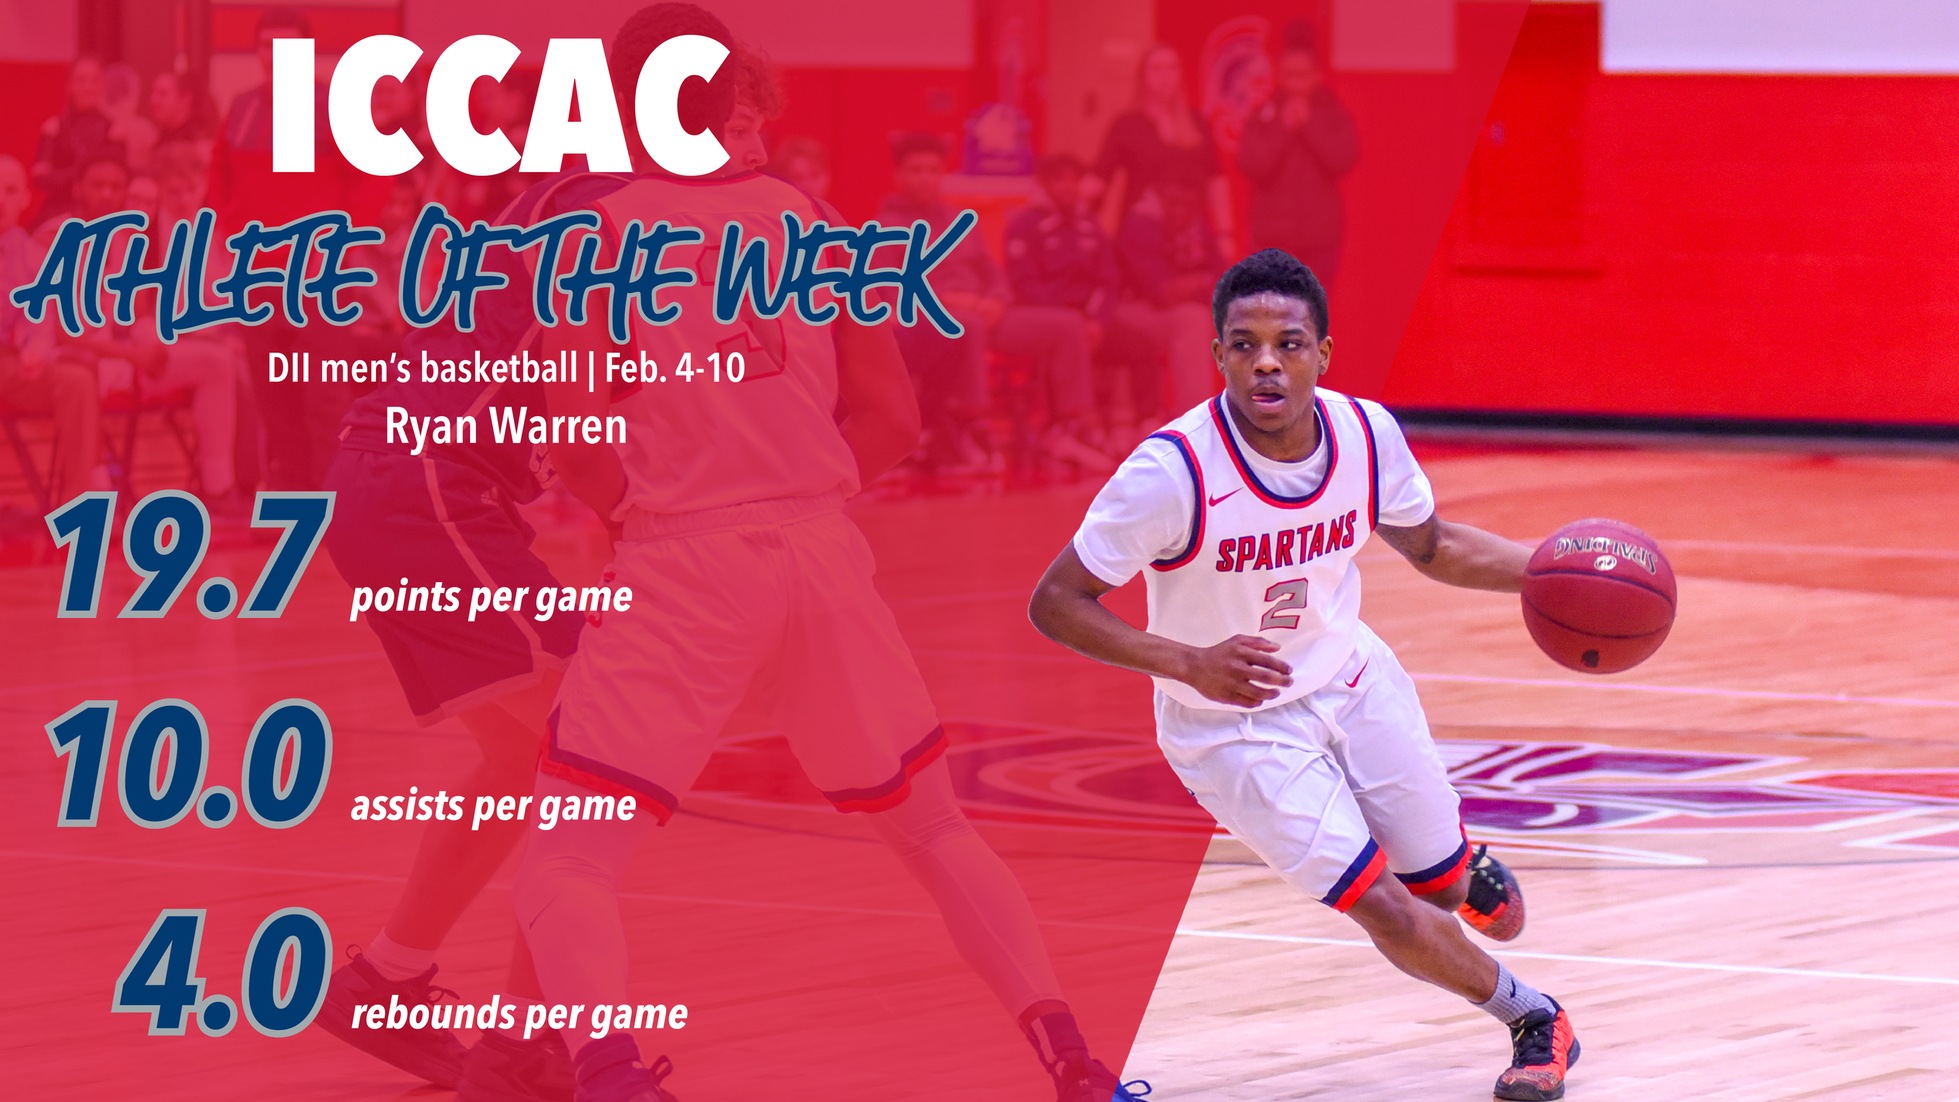 Southwestern sophomore Ryan Warren averaged 19.7 points, 10.0 assists and 4.0 rebounds per game over three games to earn ICCAC athlete of the week honors for DII men's basketball for the week of Feb. 4-10.